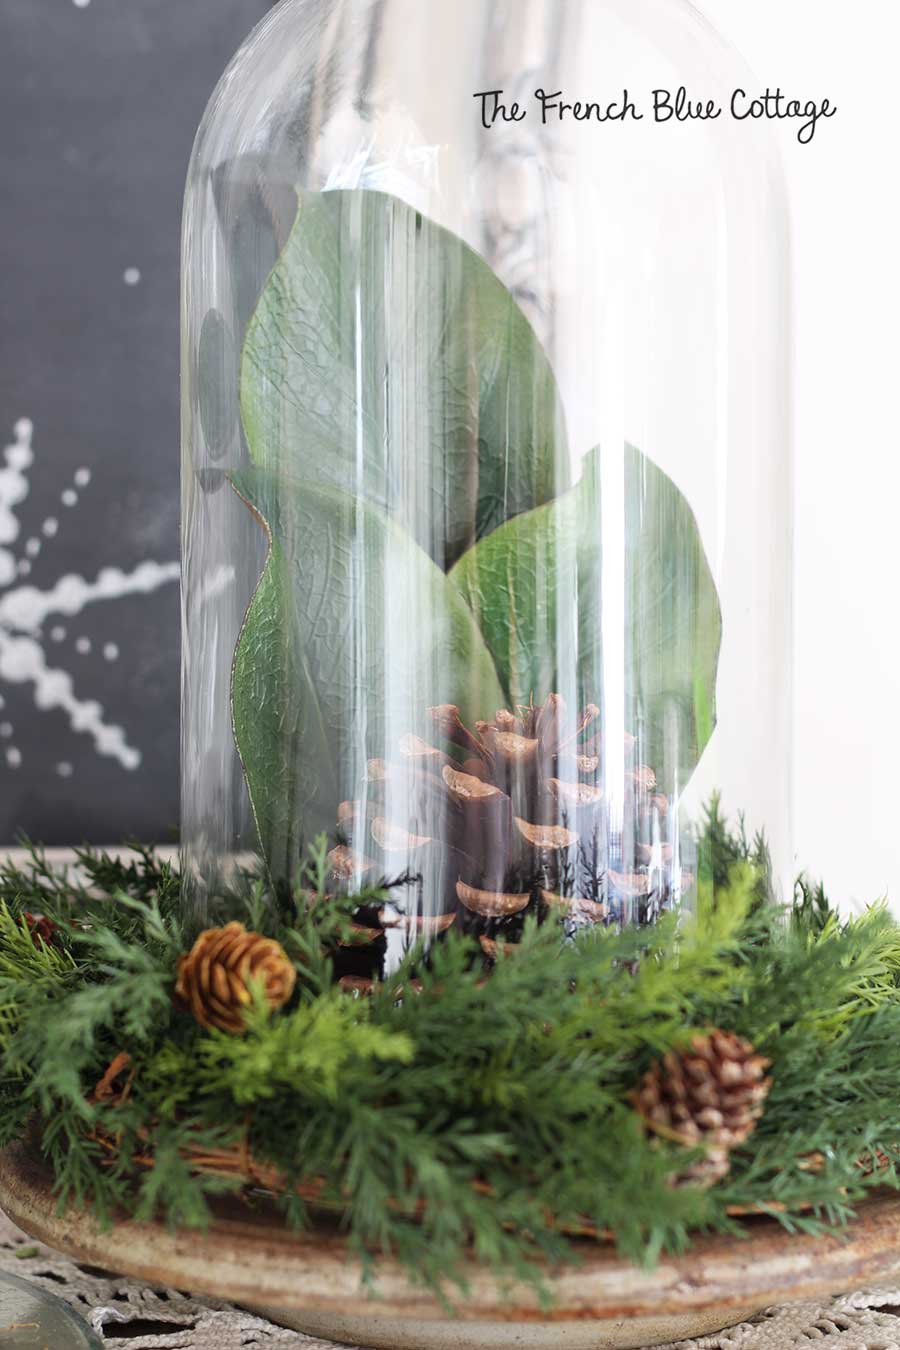 Magnolia leaves under a cloche and with an evergreen wreath.